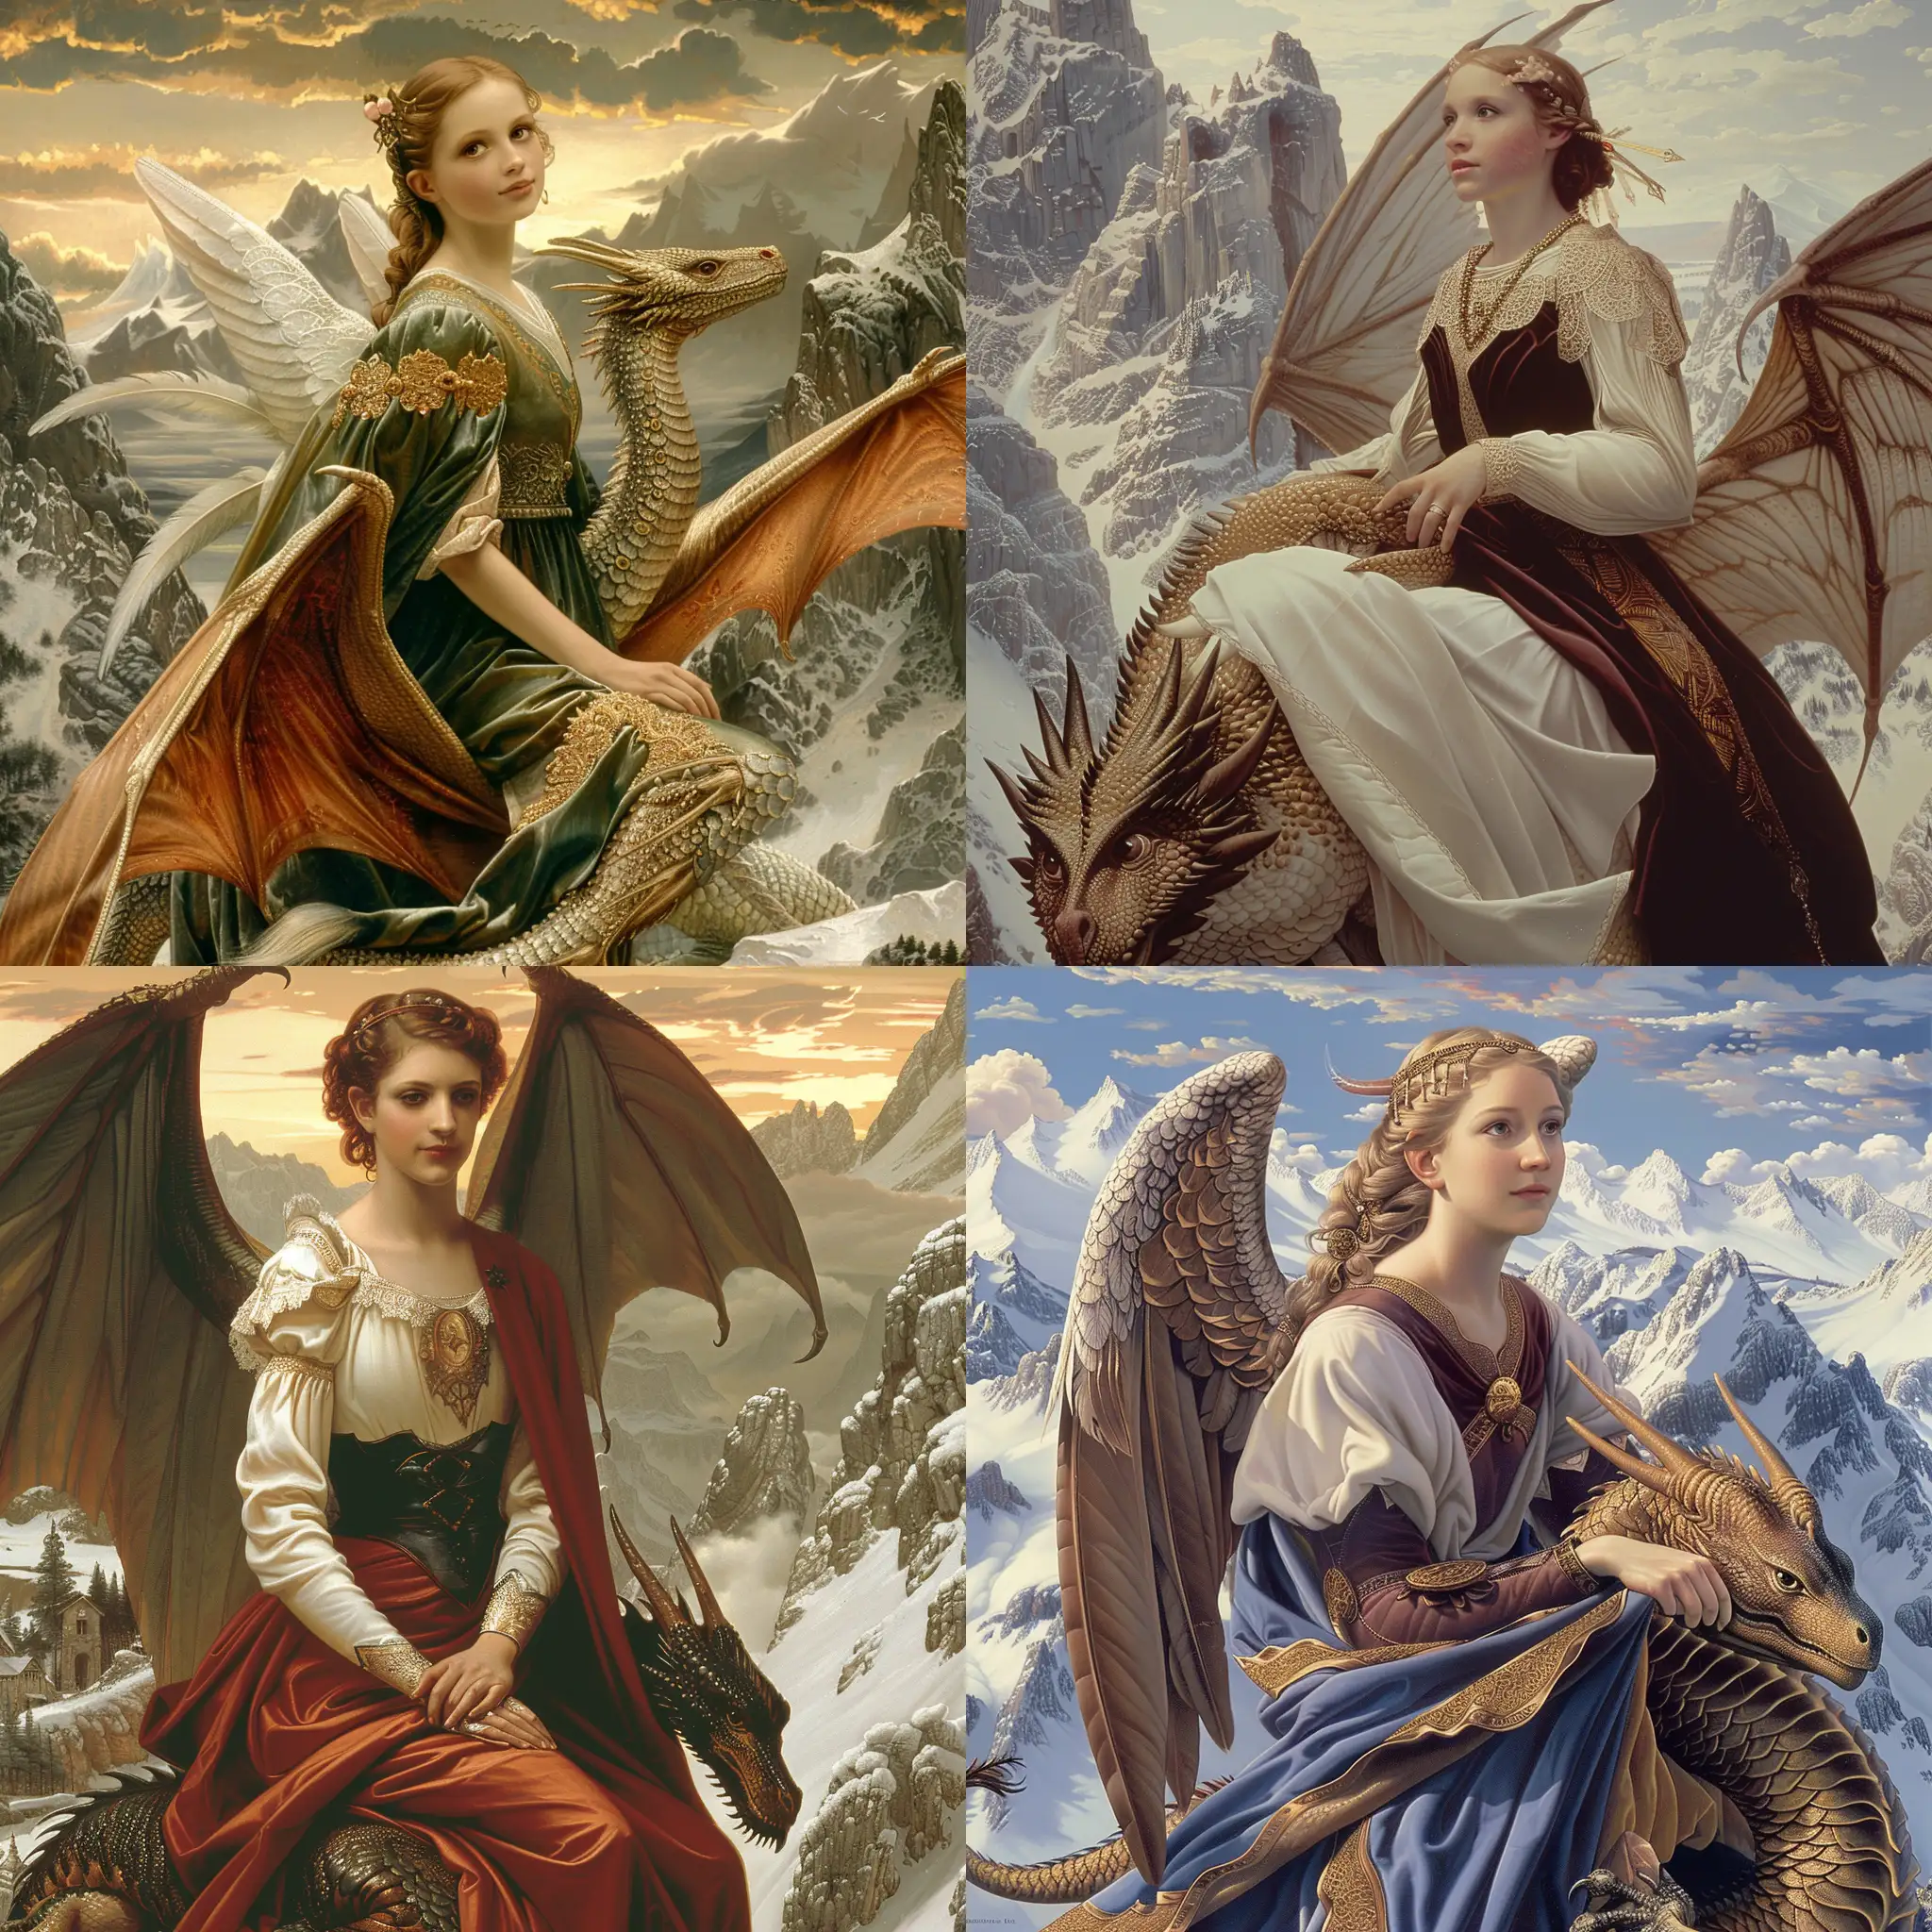 Ethereal-Medieval-Angel-Woman-Riding-Dragon-Over-Snowy-Mountains